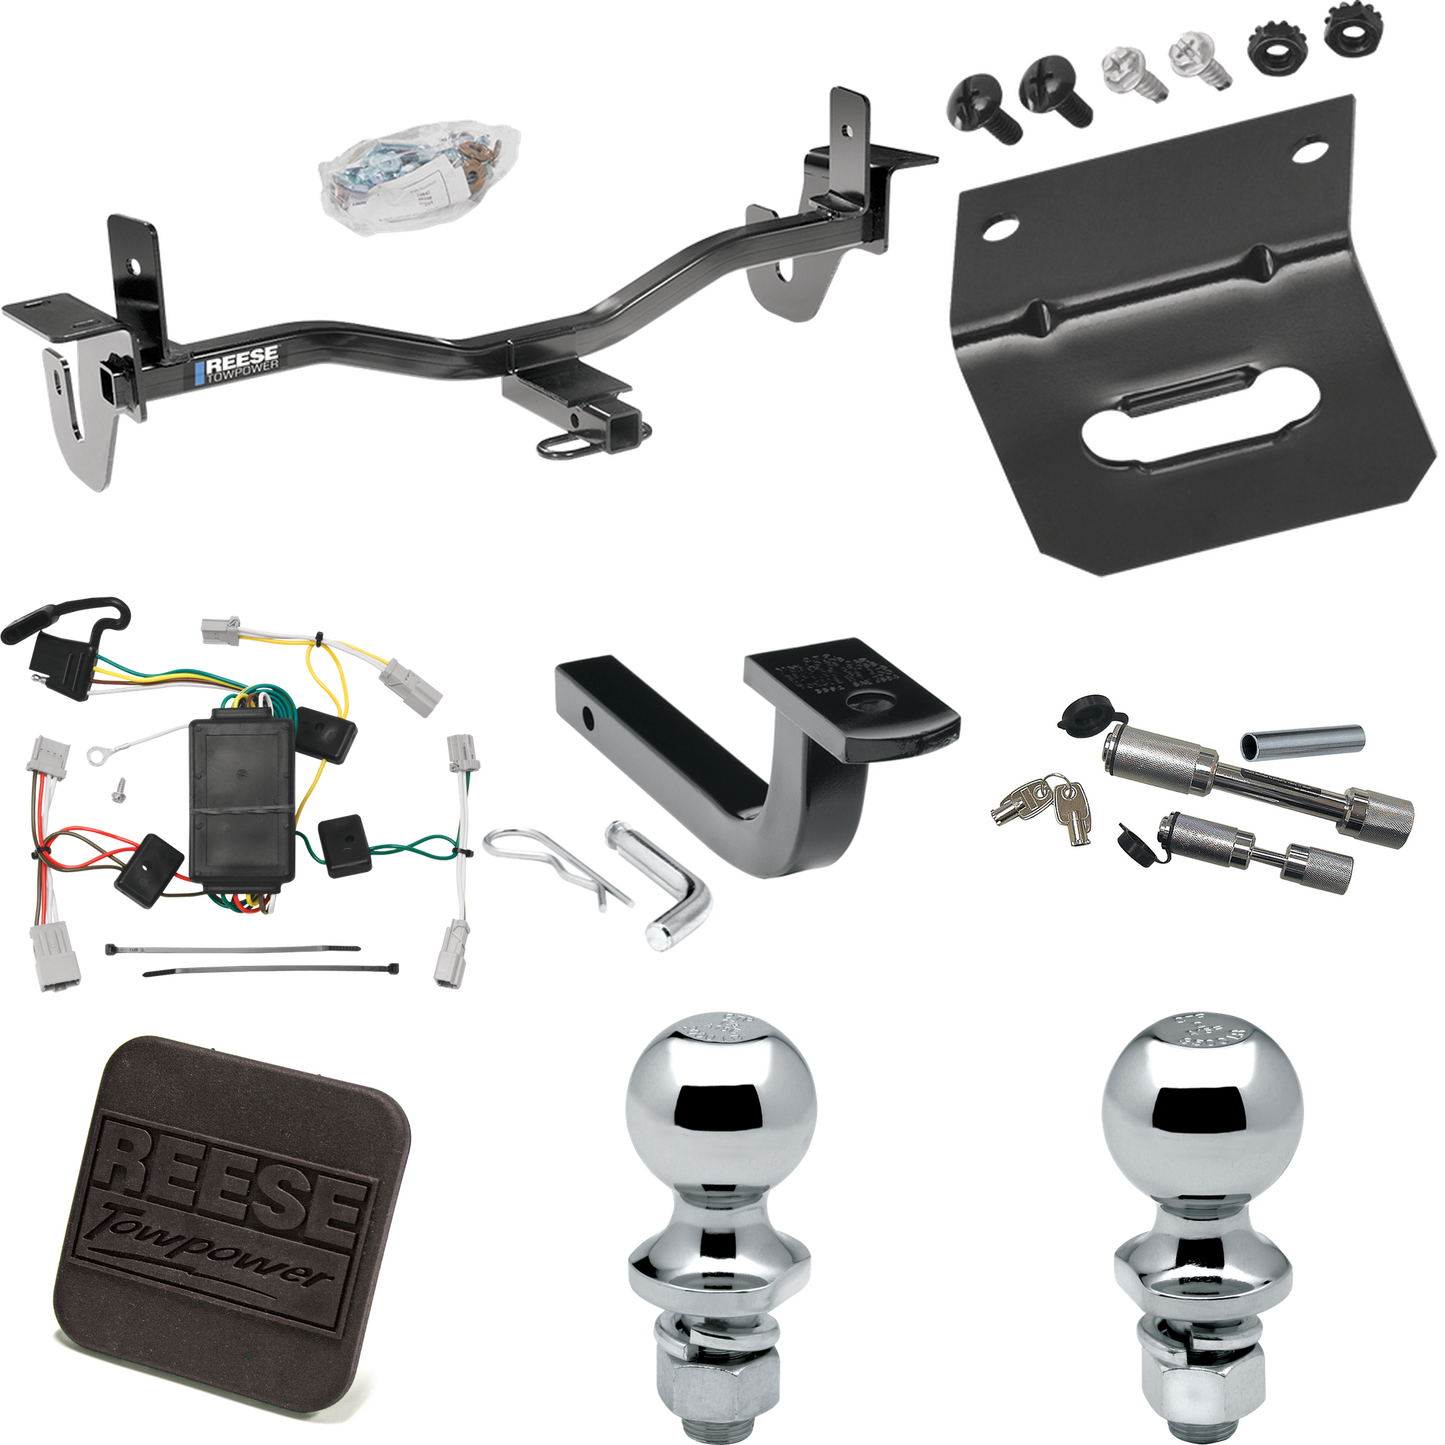 Fits 2010-2013 Mazda 3 Trailer Hitch Tow PKG w/ 4-Flat Wiring Harness + Draw-Bar + 1-7/8" + 2" Ball + Wiring Bracket + Hitch Cover + Dual Hitch & Coupler Locks (For Sedan, Except w/Grand Touring LED Taillights Models) By Reese Towpower